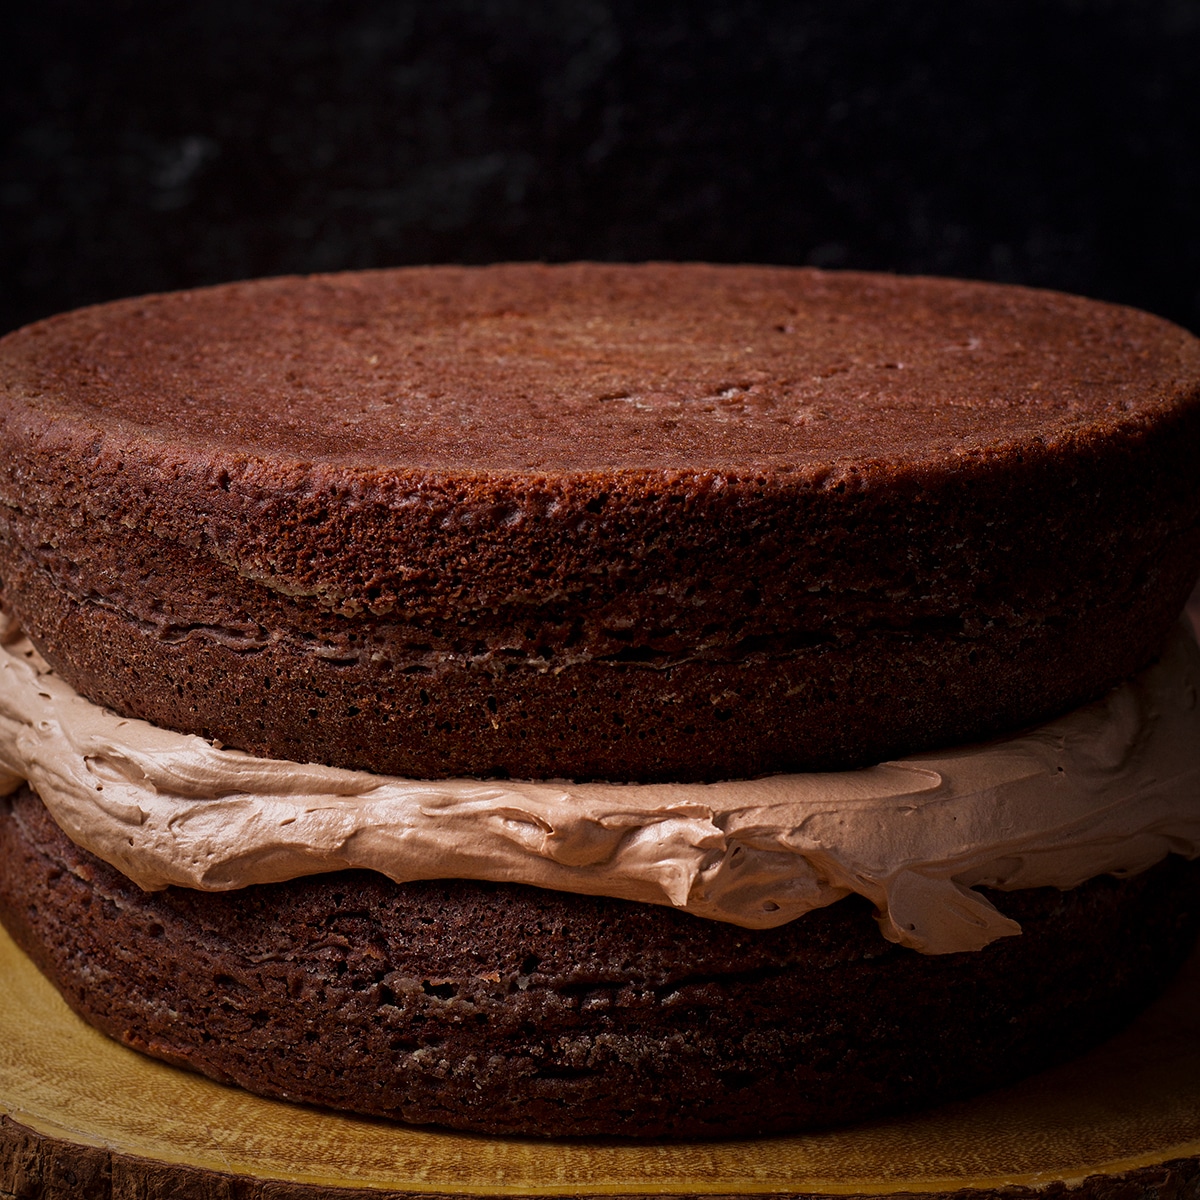 Two layers of dark chocolate cake with a thick layer of milk chocolate buttercream between them.